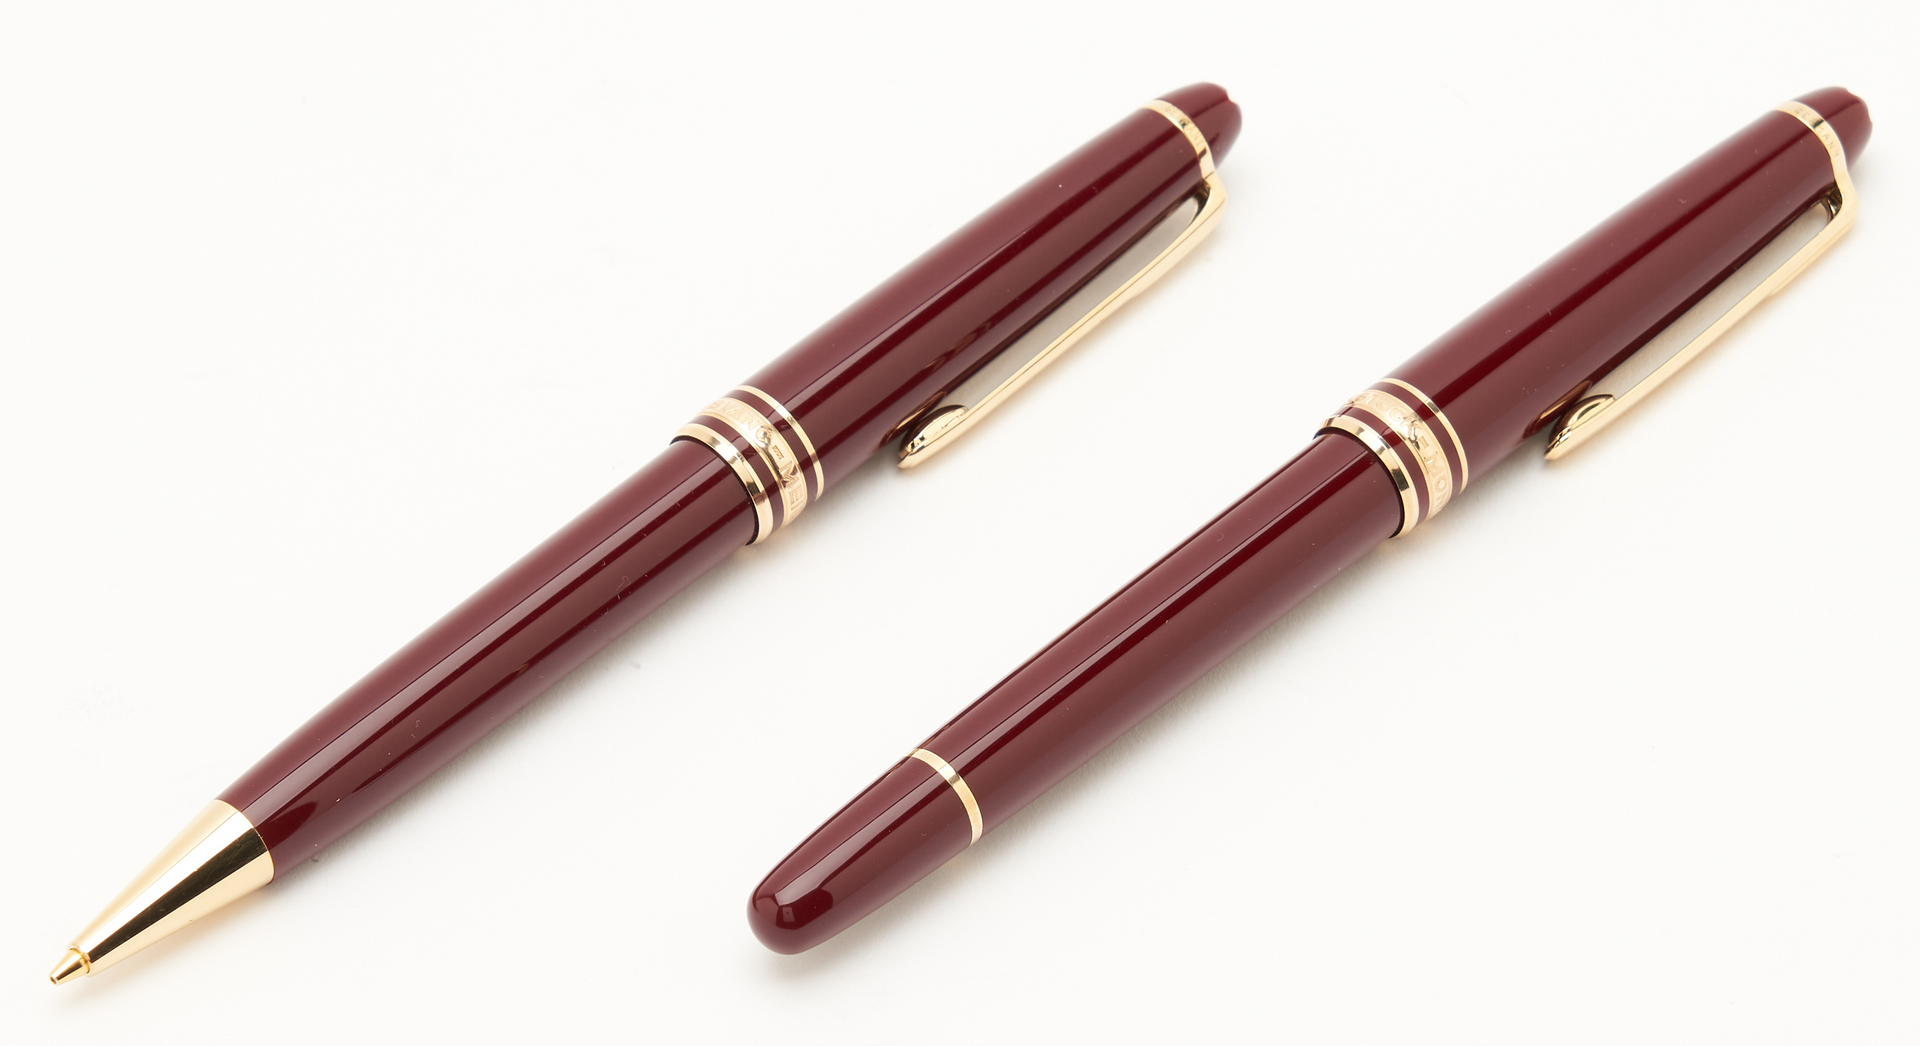 Lot 29: 4 Montblanc Meisterstuck Writing Instruments, incl. Fountain Pen